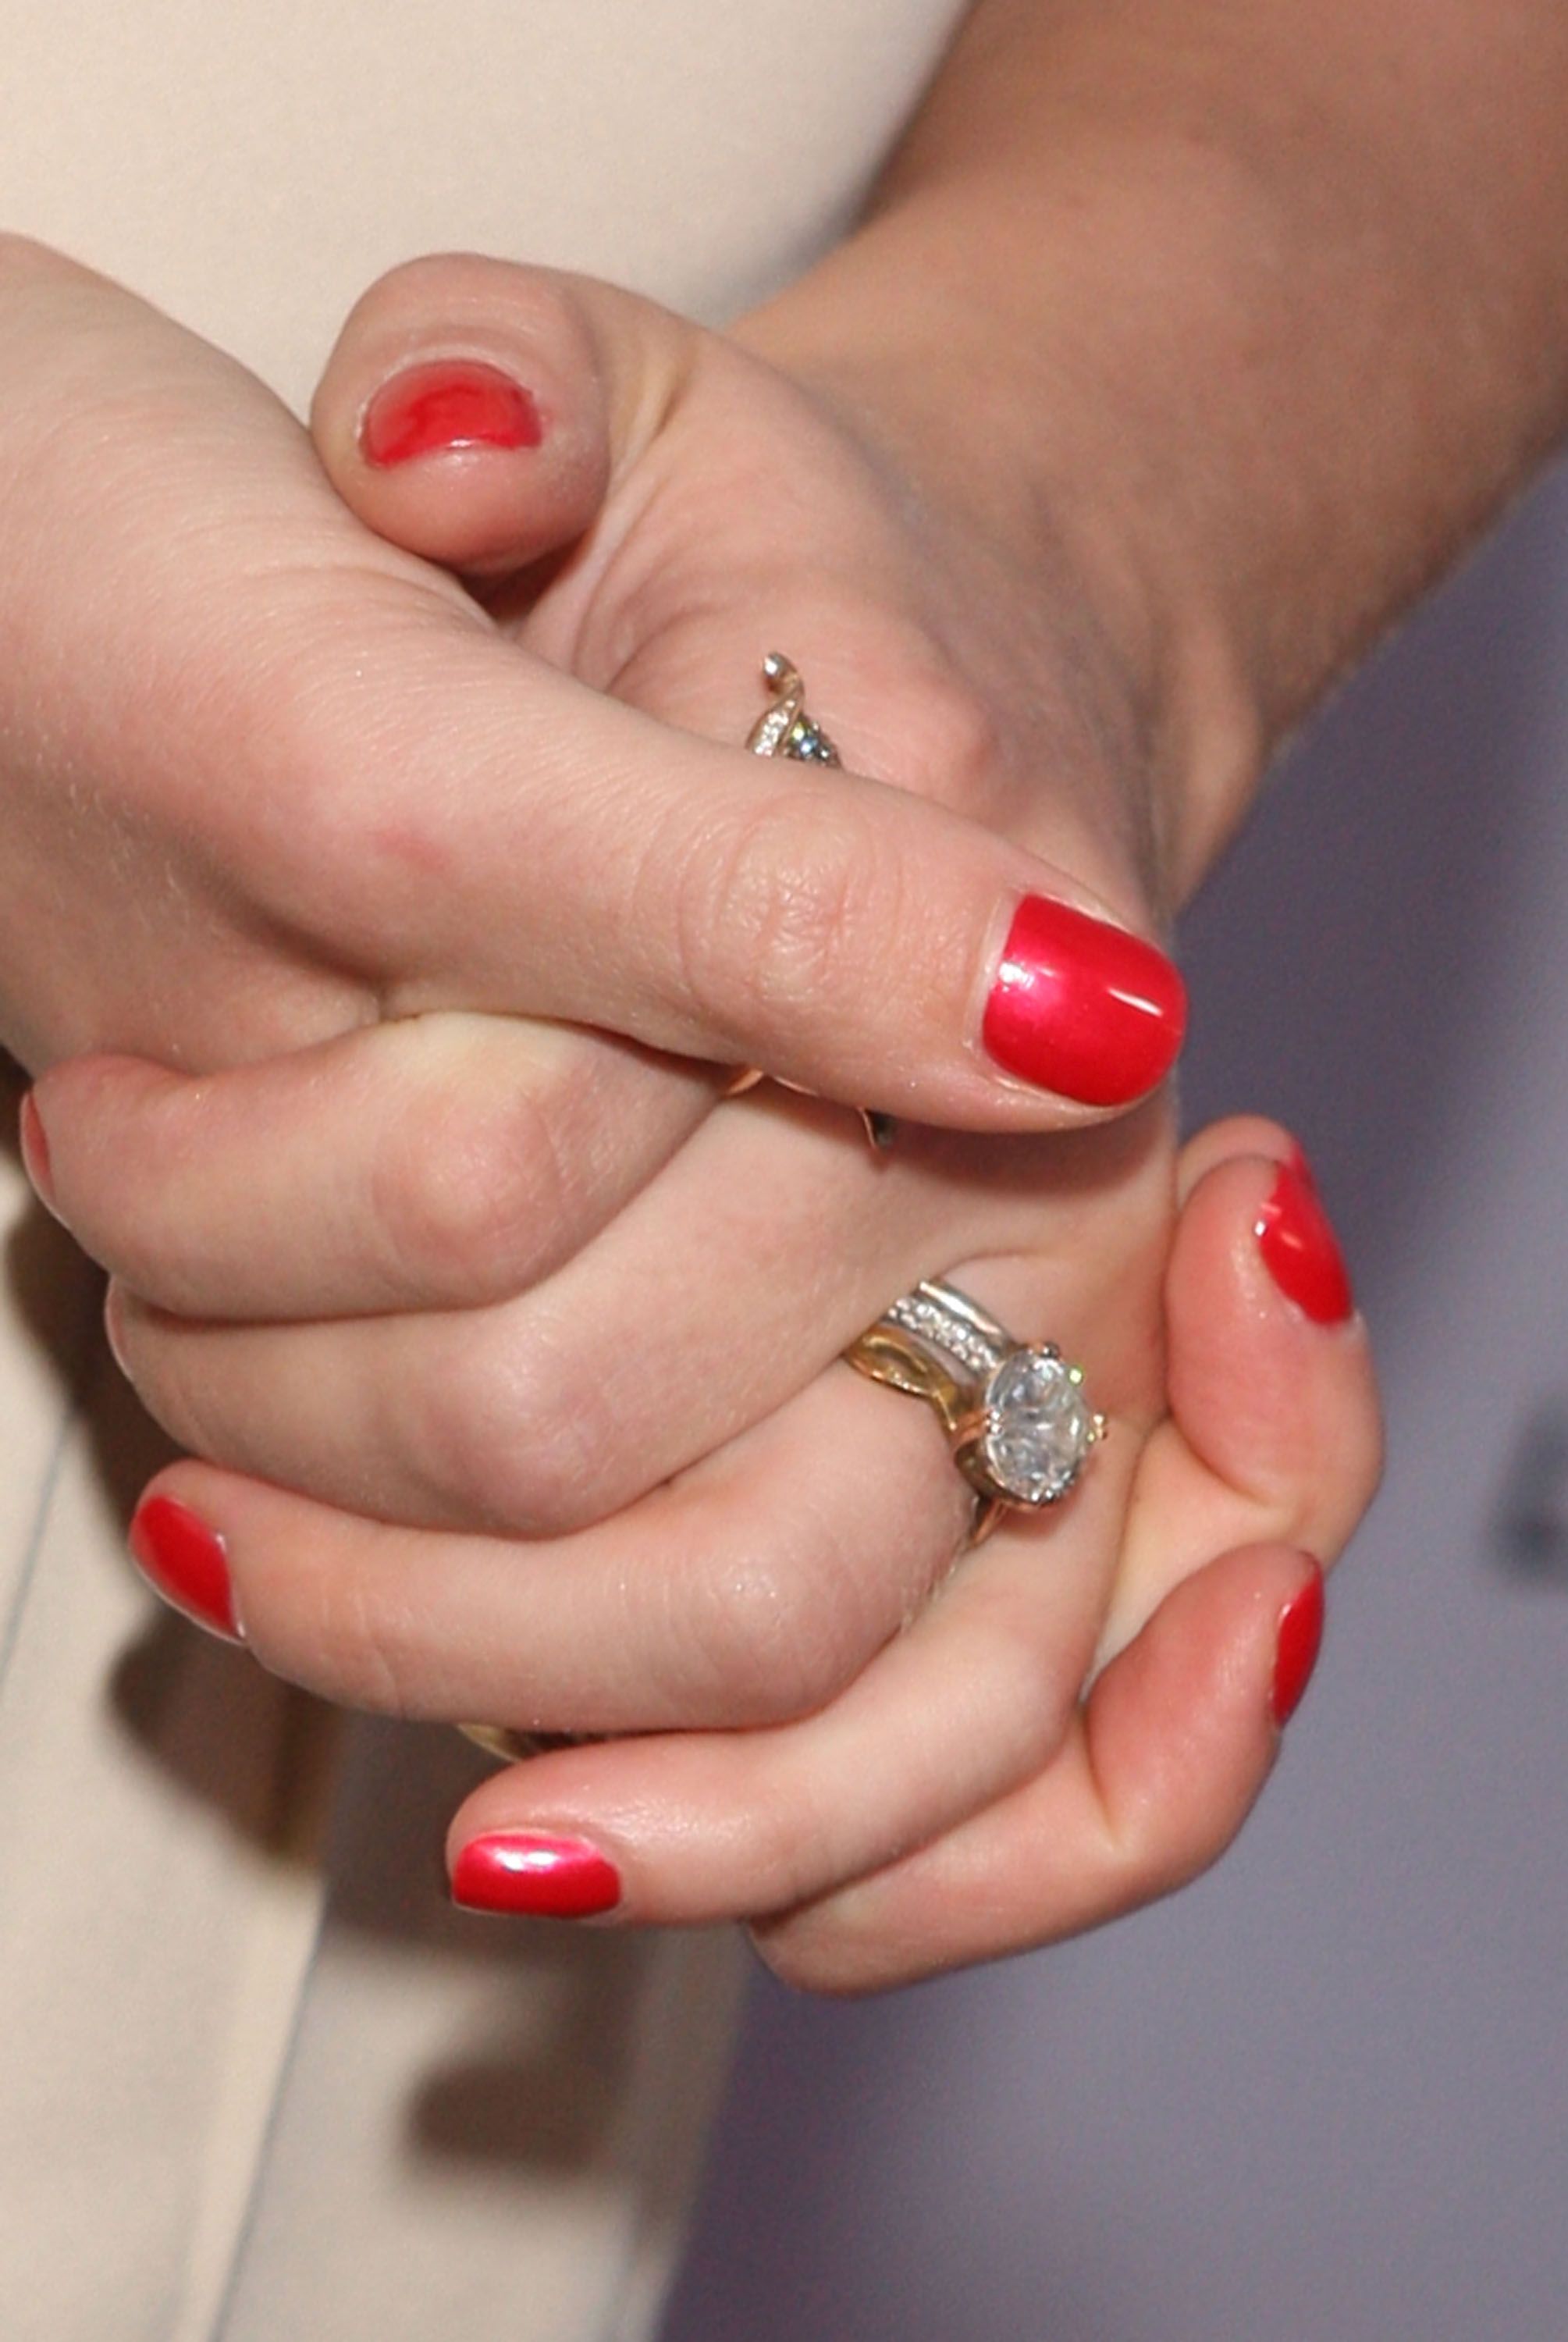 Scarlett Johansson wearing her engagement ring in July 2009 | Source: Getty Images